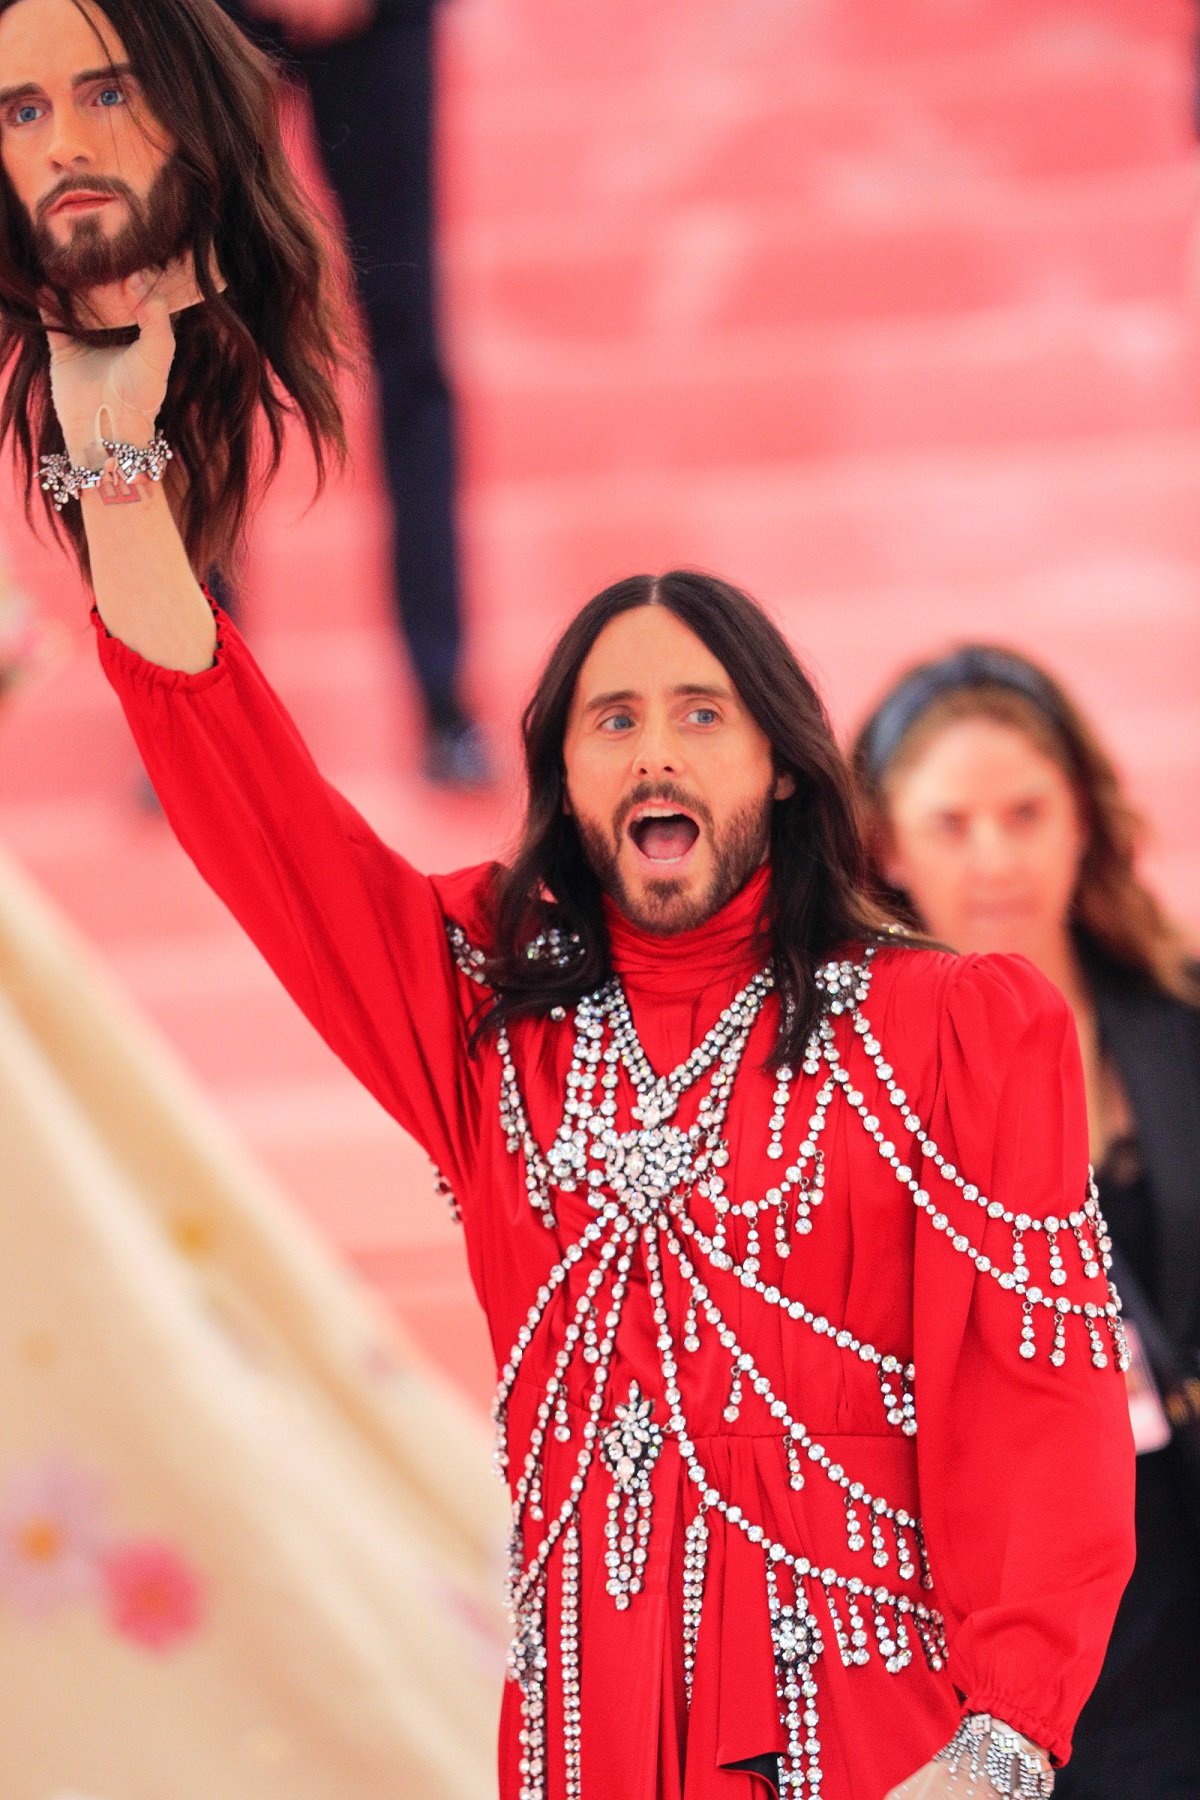 Jared Leto at the Met Gala on May 06, 2019, in New York City. | Source: Getty Images 